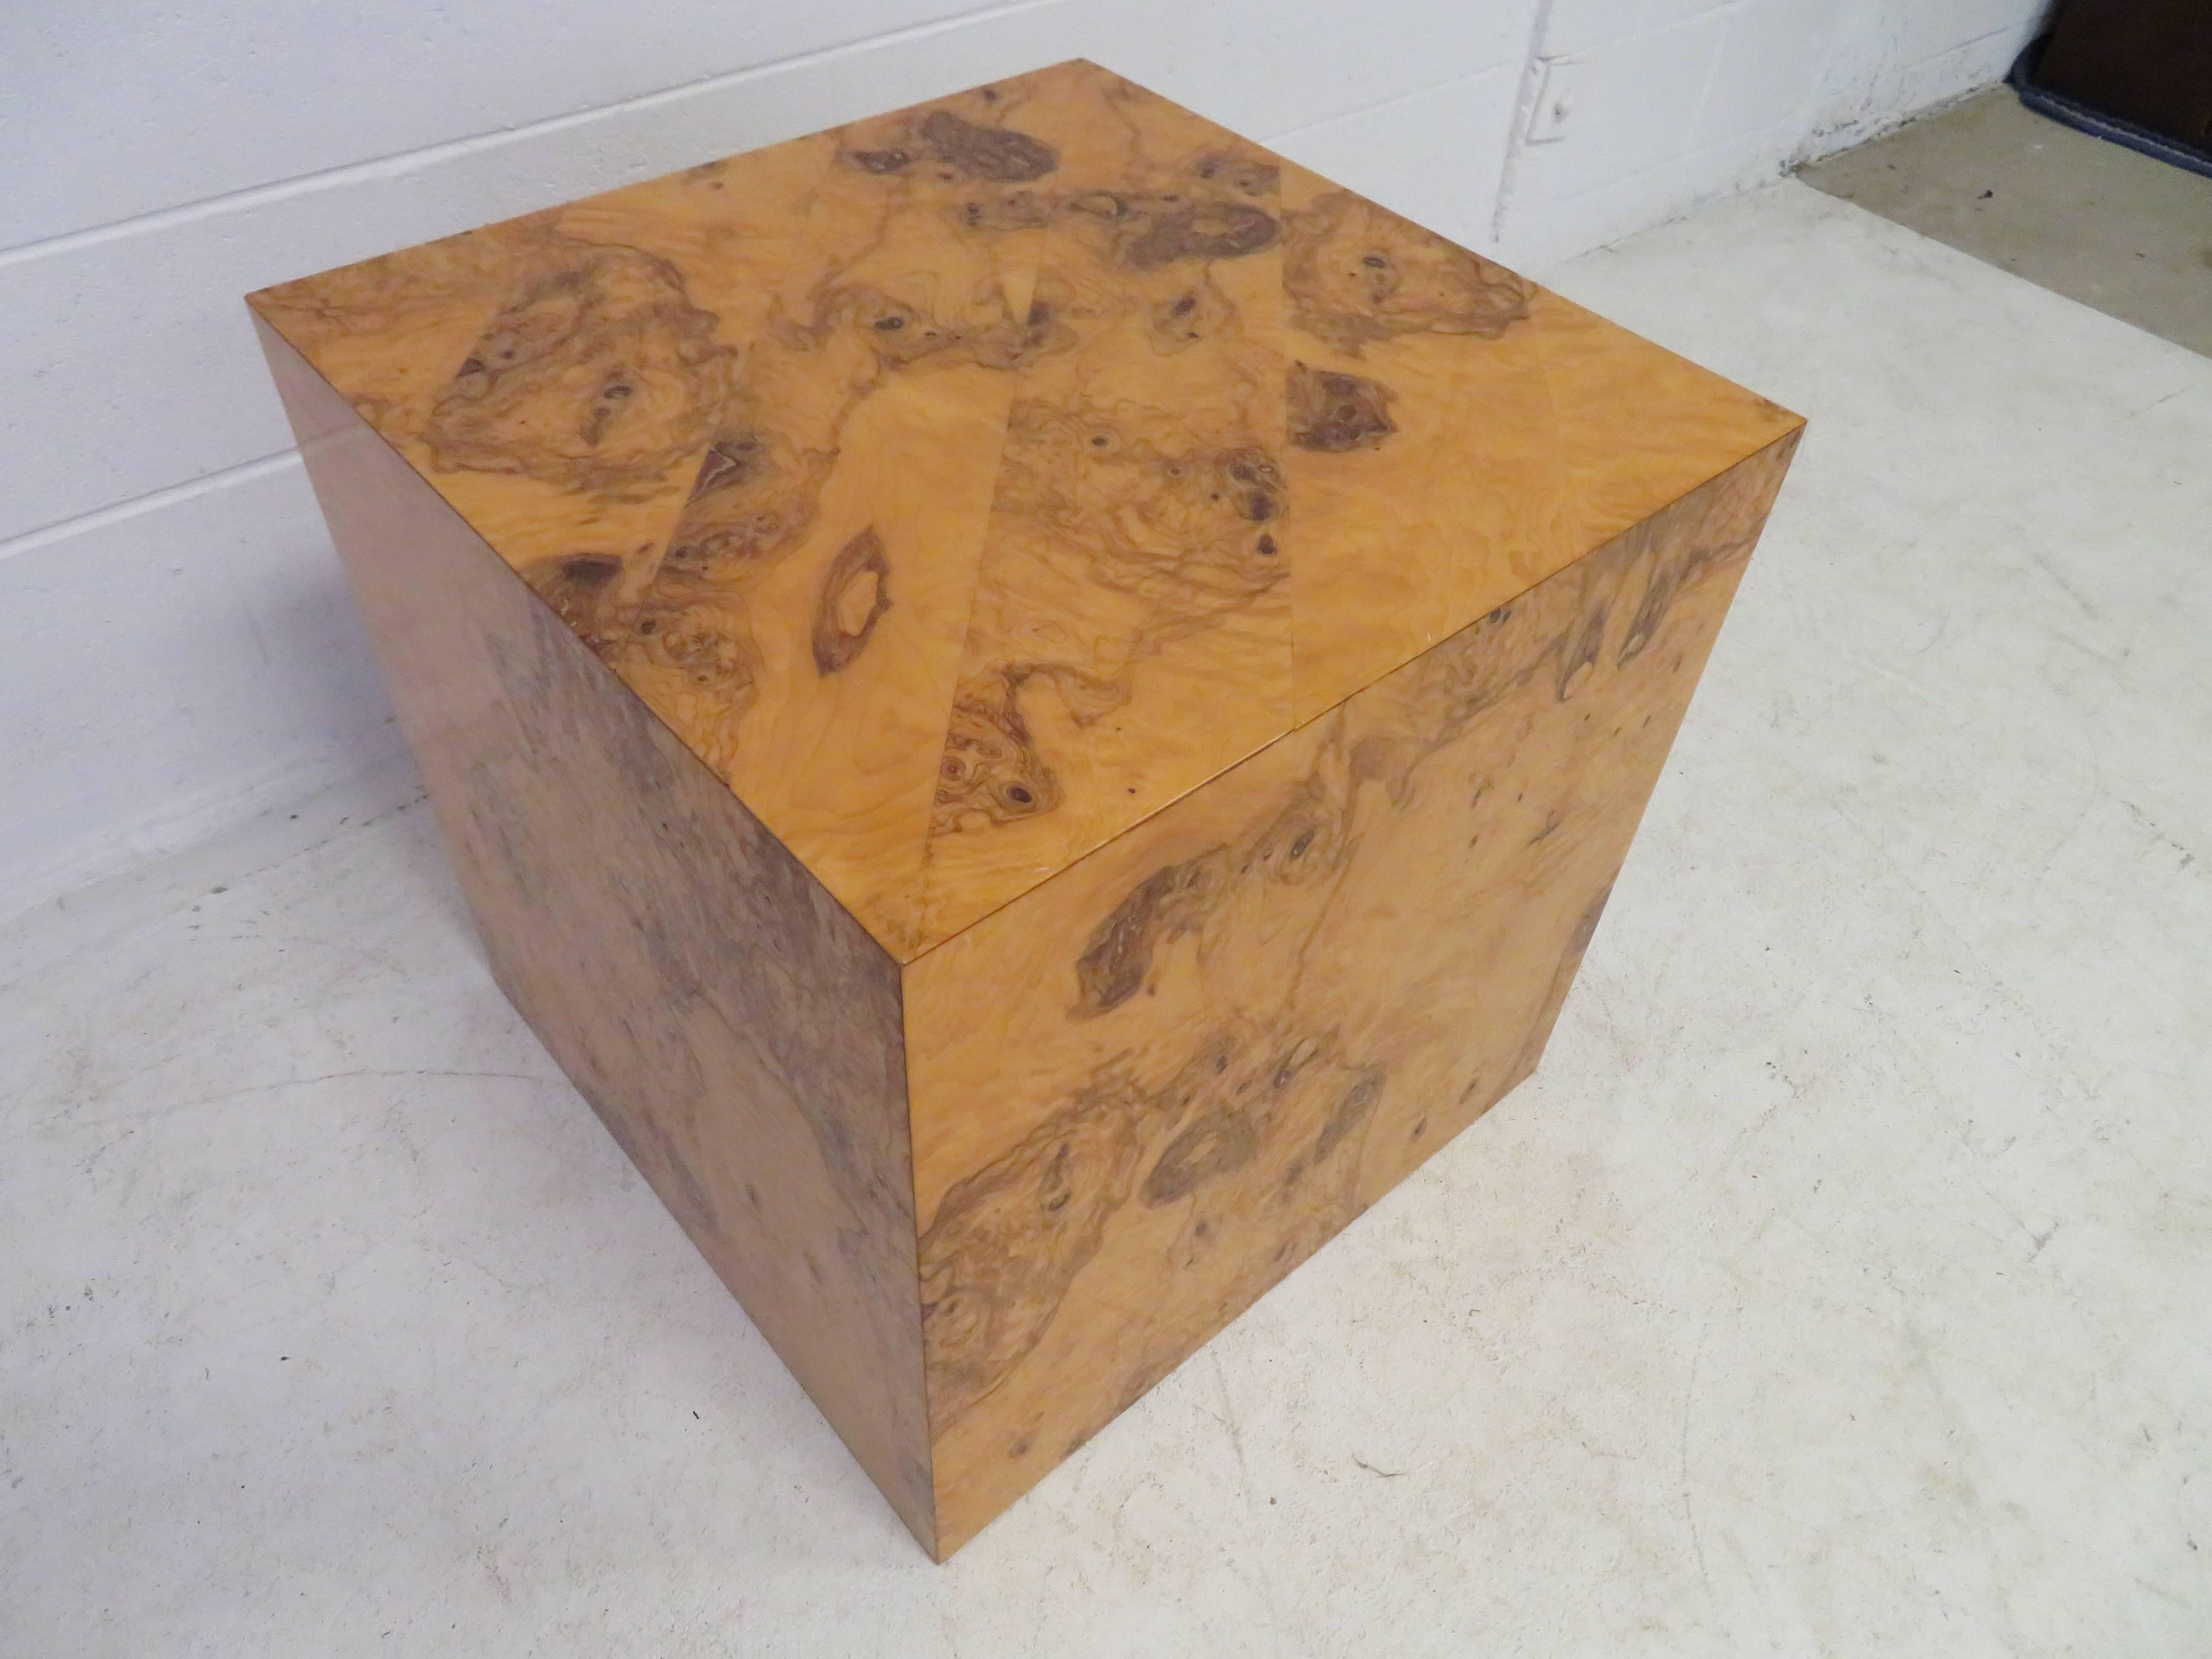 Milo Baughman for Thayer Coggin burl wood cube, circa 1970. Features exotic wood graining to the burl and great linear form. Perfect as a side table or as a pedestal for a sculpture. Please check out our huge selection of other pieces designed by